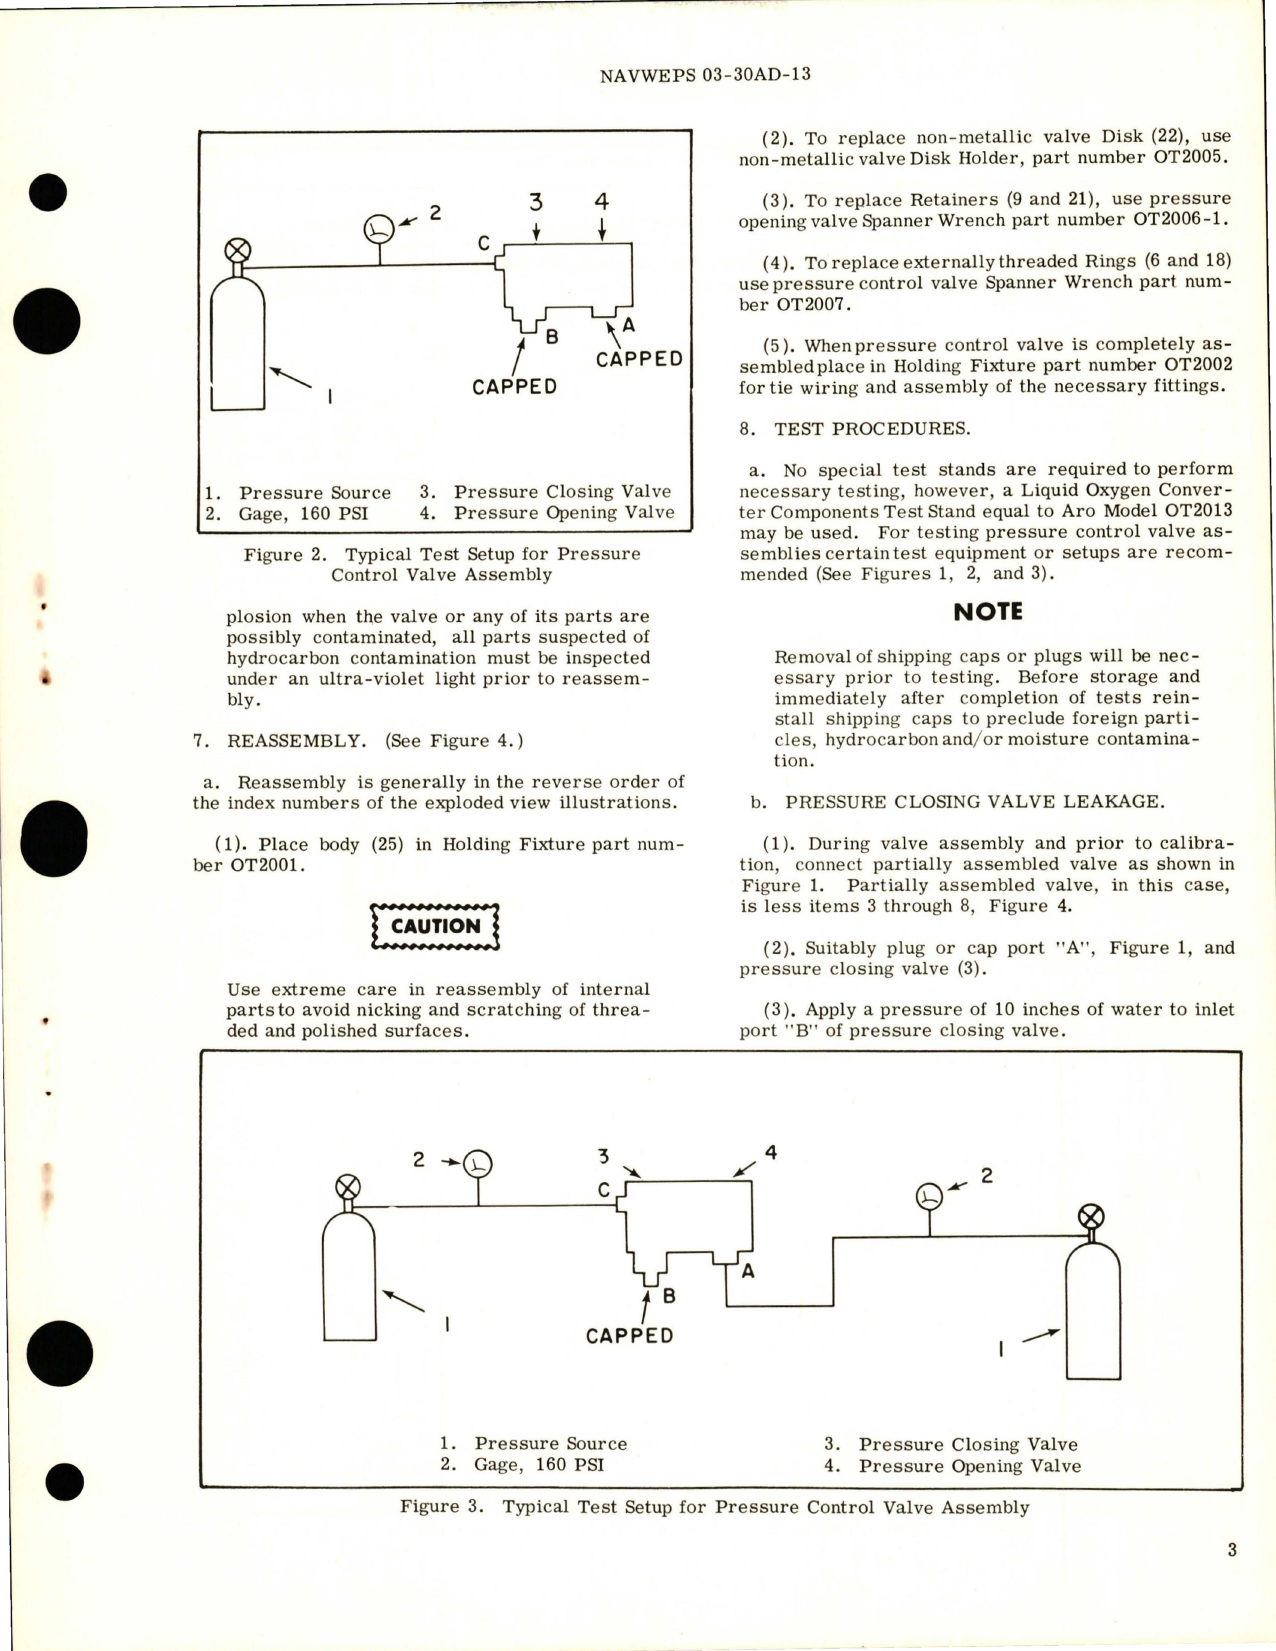 Sample page 5 from AirCorps Library document: Overhaul Instructions with Parts Breakdown for Pressure Control Valve - Part 21190